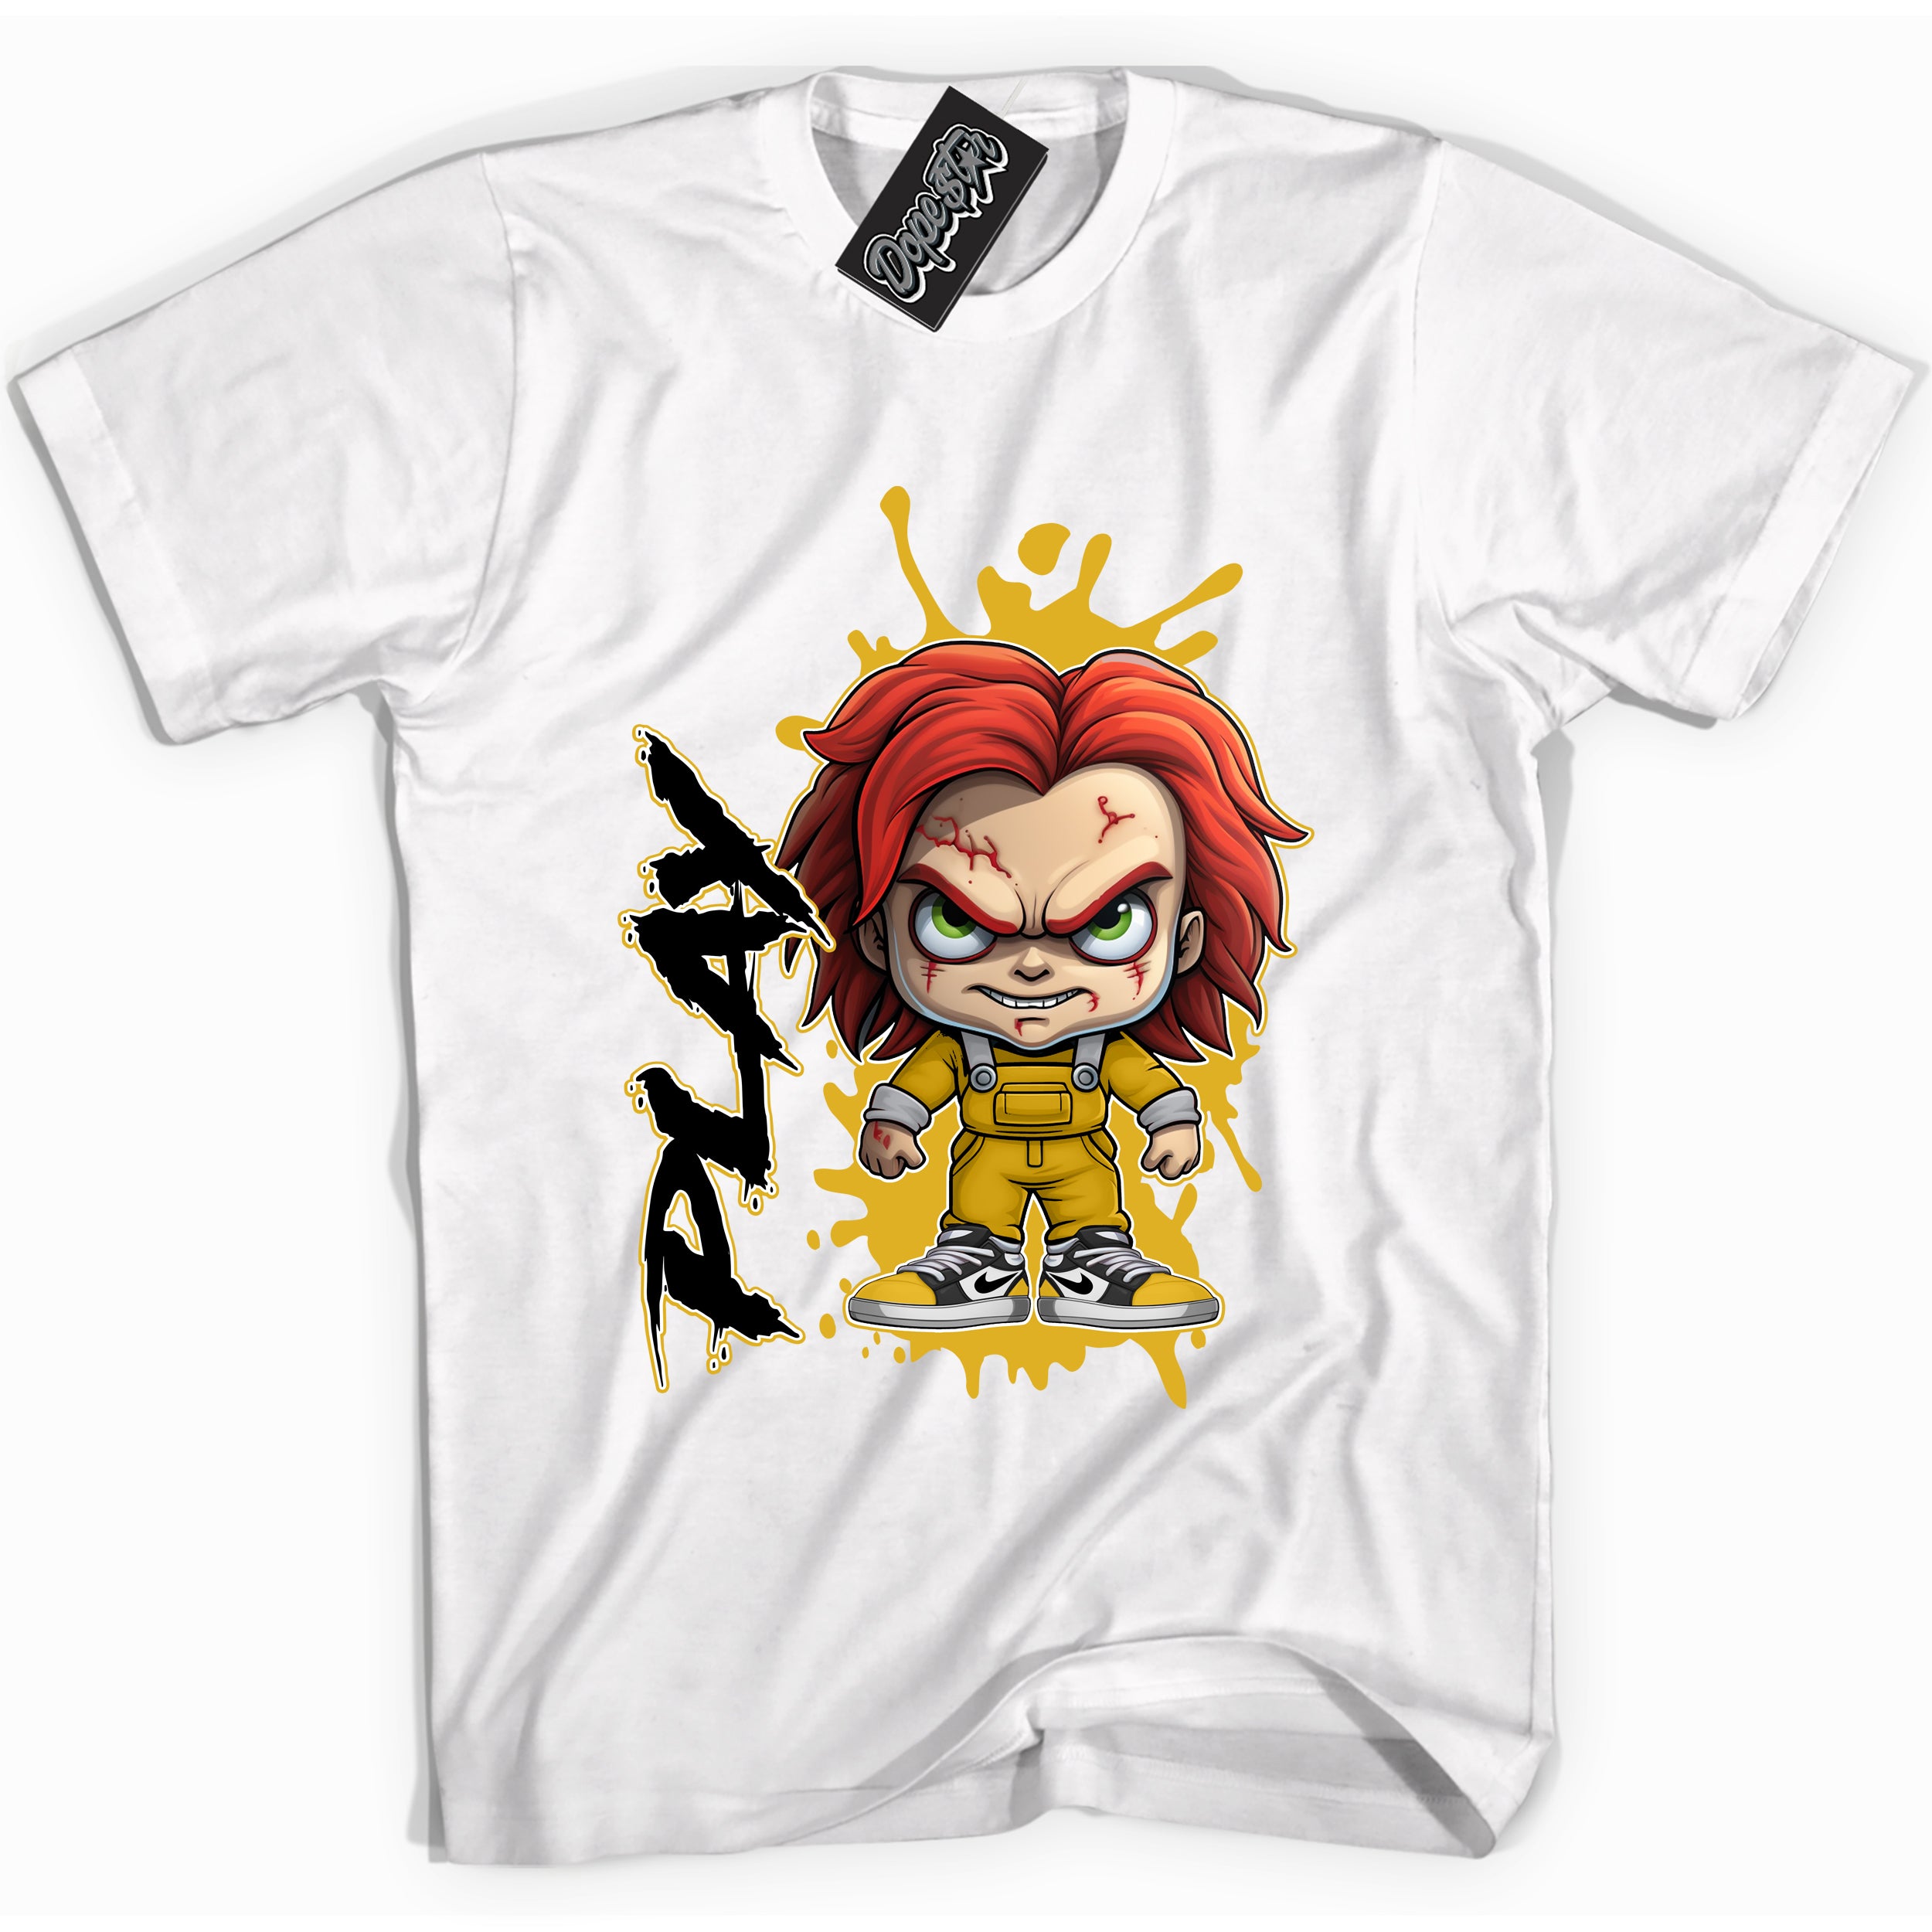 Cool White Shirt with “ Play” design that perfectly matches Yellow Ochre 6s Sneakers.